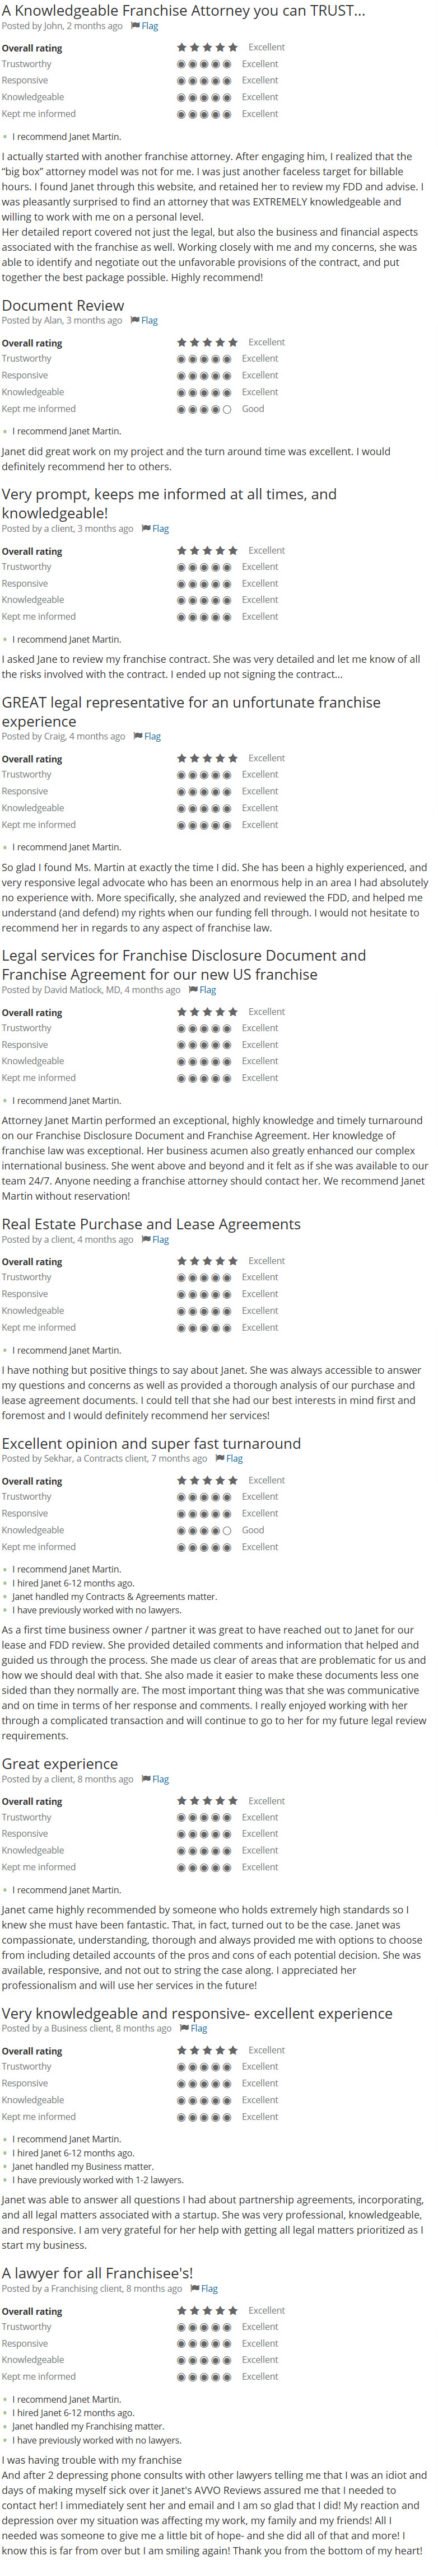 Client Reviews of Janet Martin